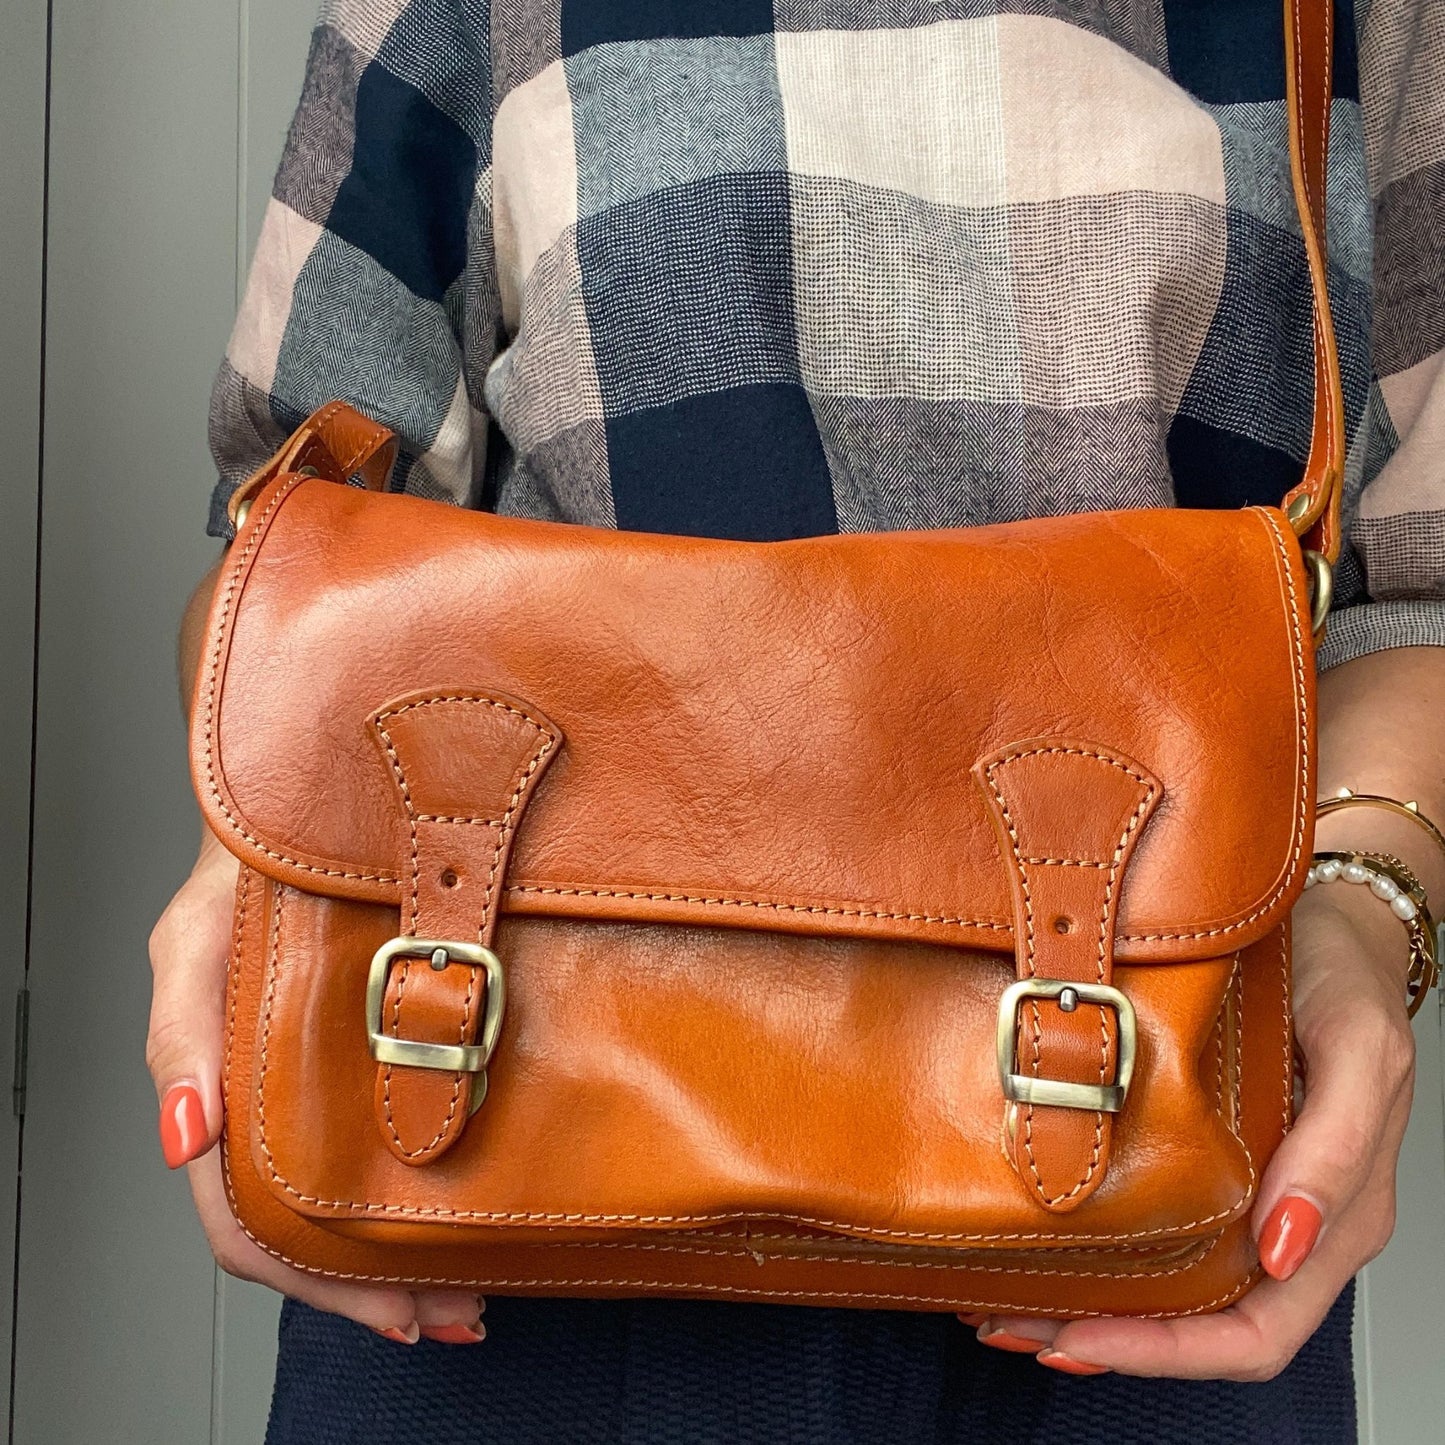 The Classic Leather Satchel